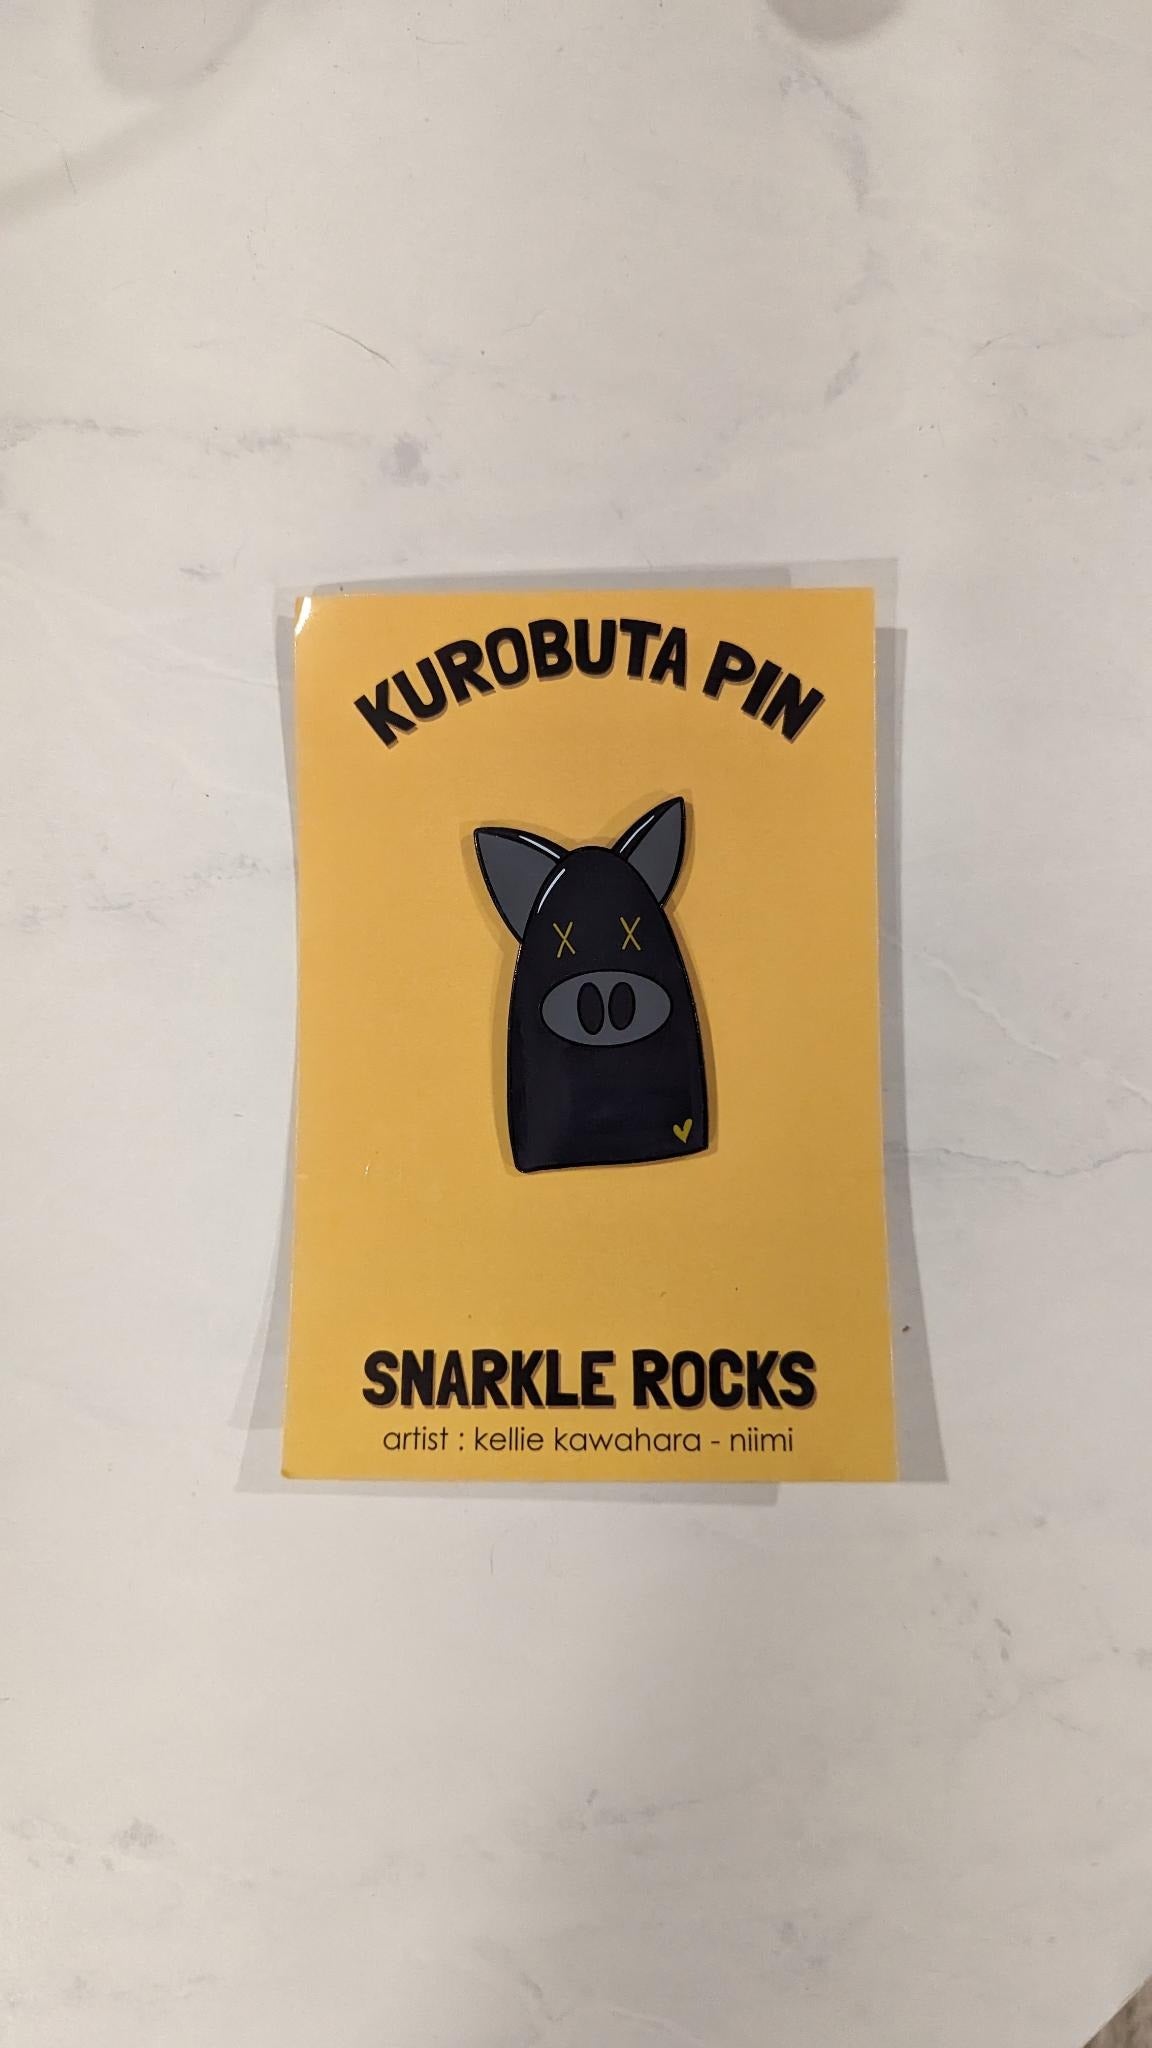 An enamel pin of a black pig with yellow X's for eyes and a yellow heart in the lower right corner.  The pin sits against a yellow cardstock backing with the text "Kurobuta pin" "Snarkle Rocks" "artist: kellie kawahara-niimi"